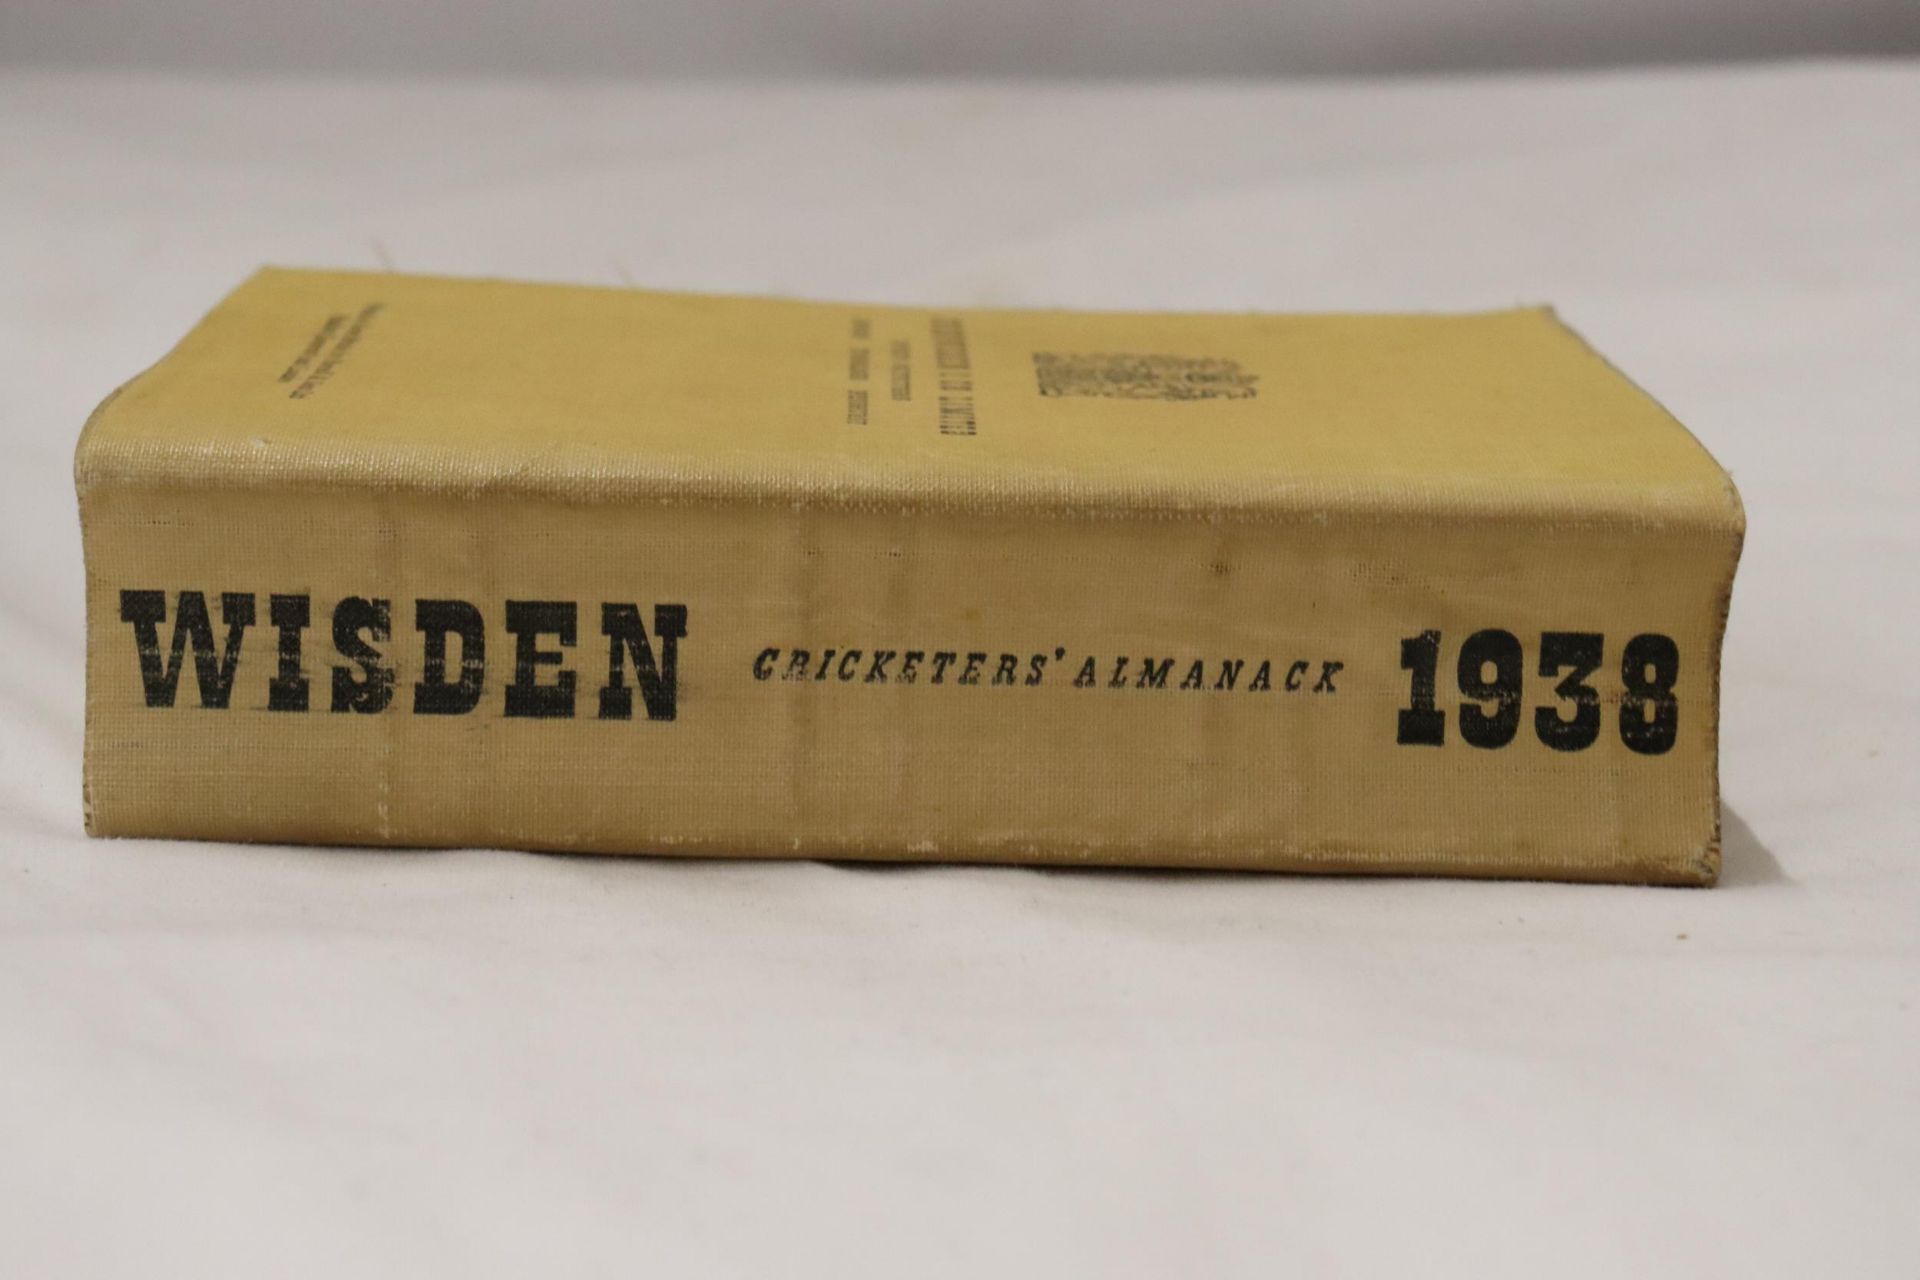 A 1938 COPY OF WISDEN'S CRICKETER'S ALMANACK. THIS COPY IS IN USED CONDITION, THE SPINE IS INTACT. - Bild 2 aus 4